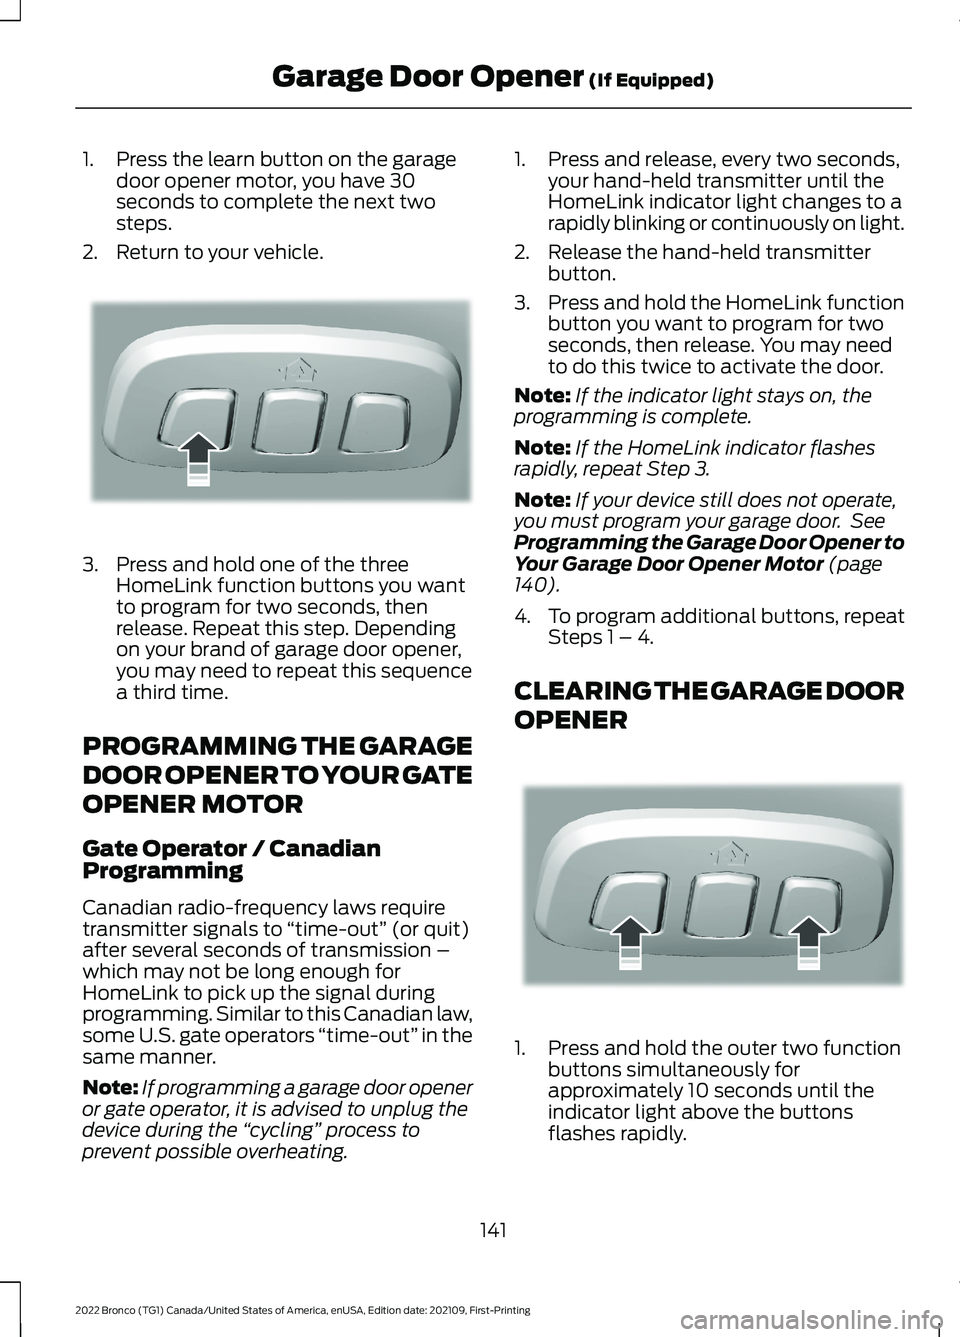 FORD BRONCO 2022 Owners Guide 1.Press the learn button on the garagedoor opener motor, you have 30seconds to complete the next twosteps.
2.Return to your vehicle.
3.Press and hold one of the threeHomeLink function buttons you want